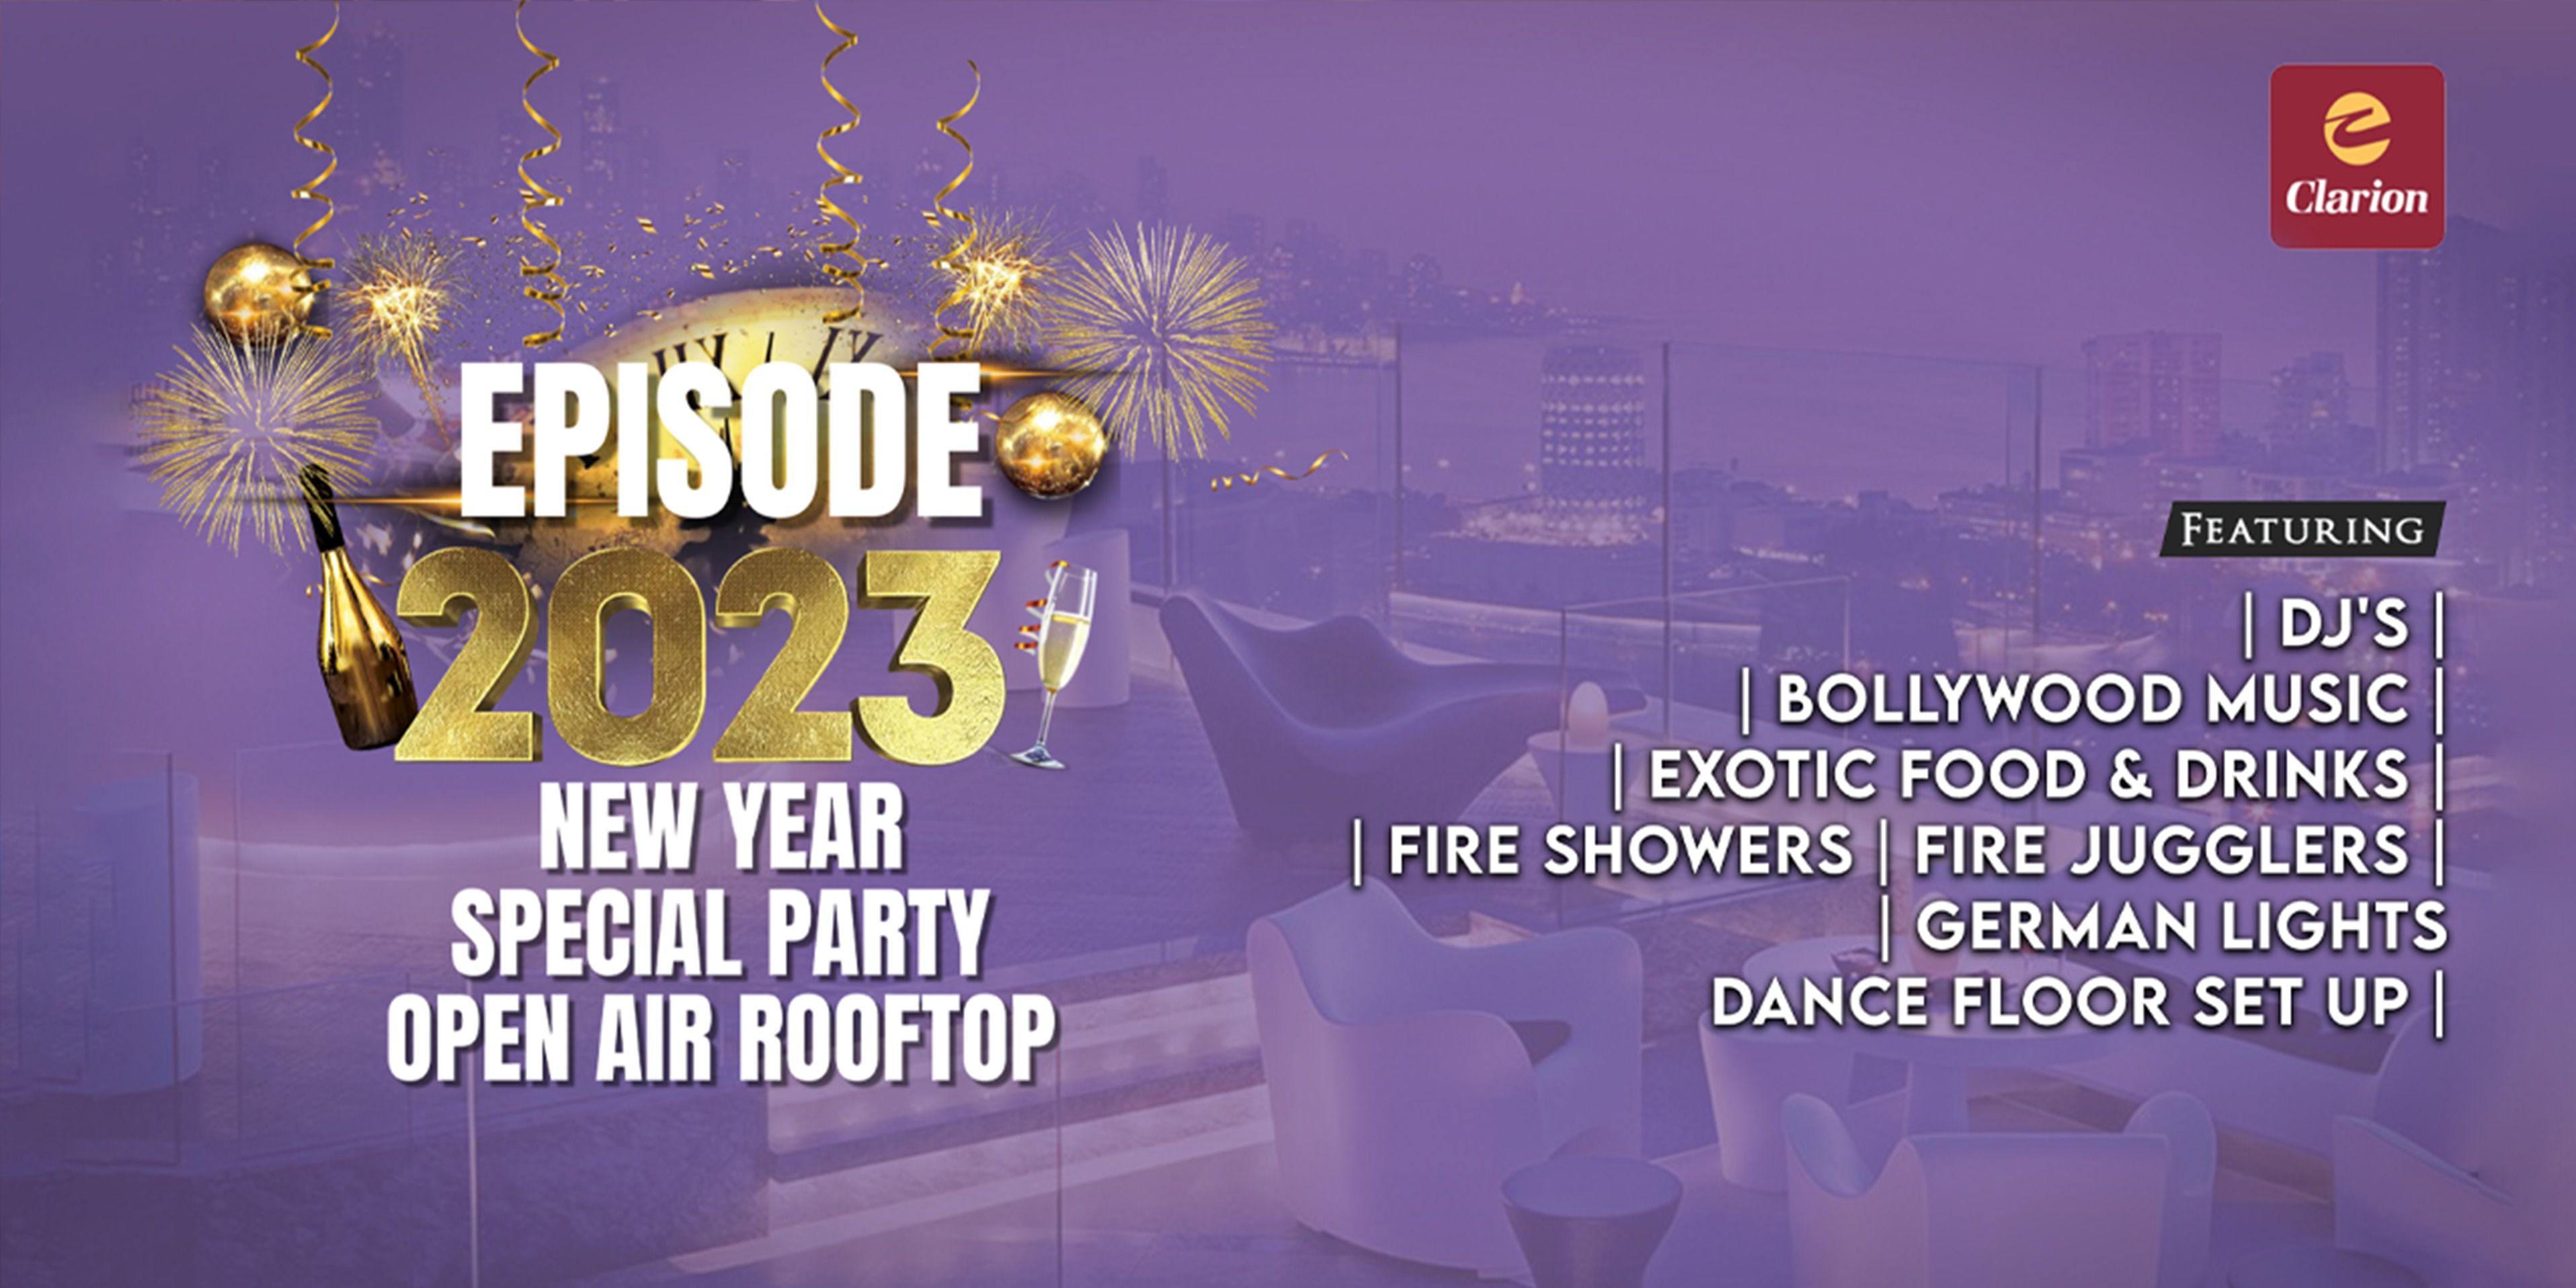 Episode 2023-Open Air Rooftop party